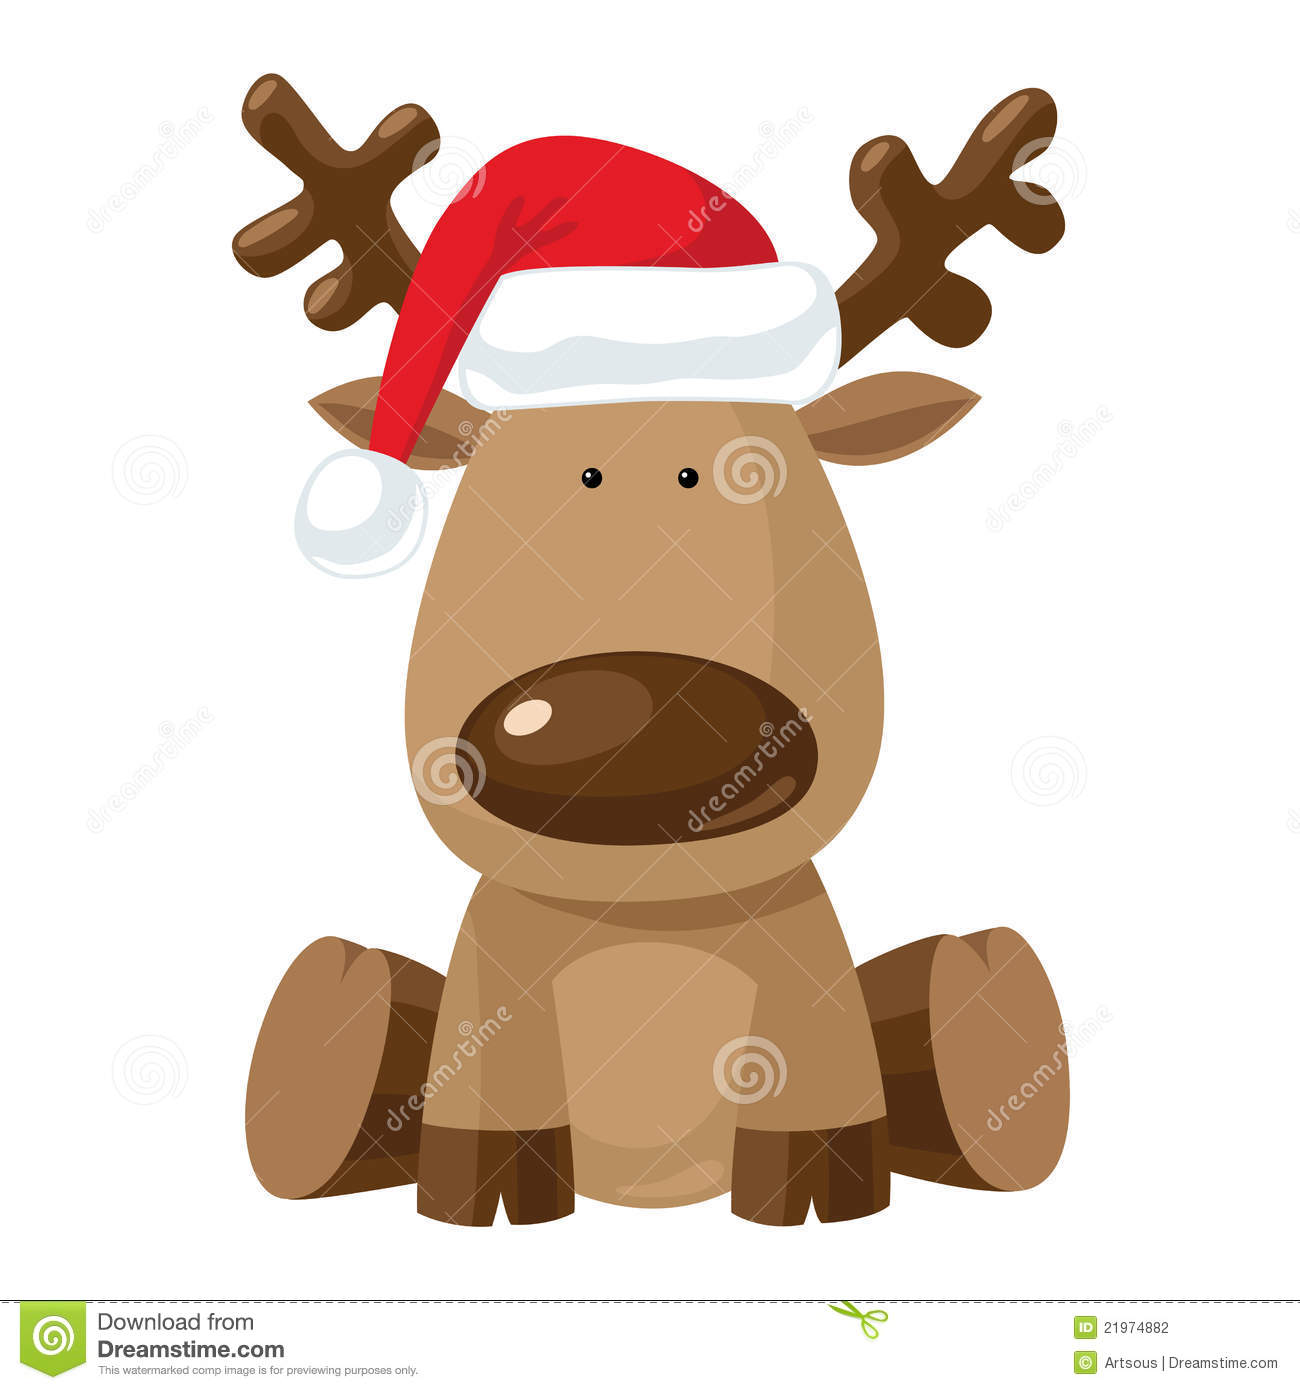 More Similar Stock Images Of   Christmas Reindeer In Santa S Red Hat